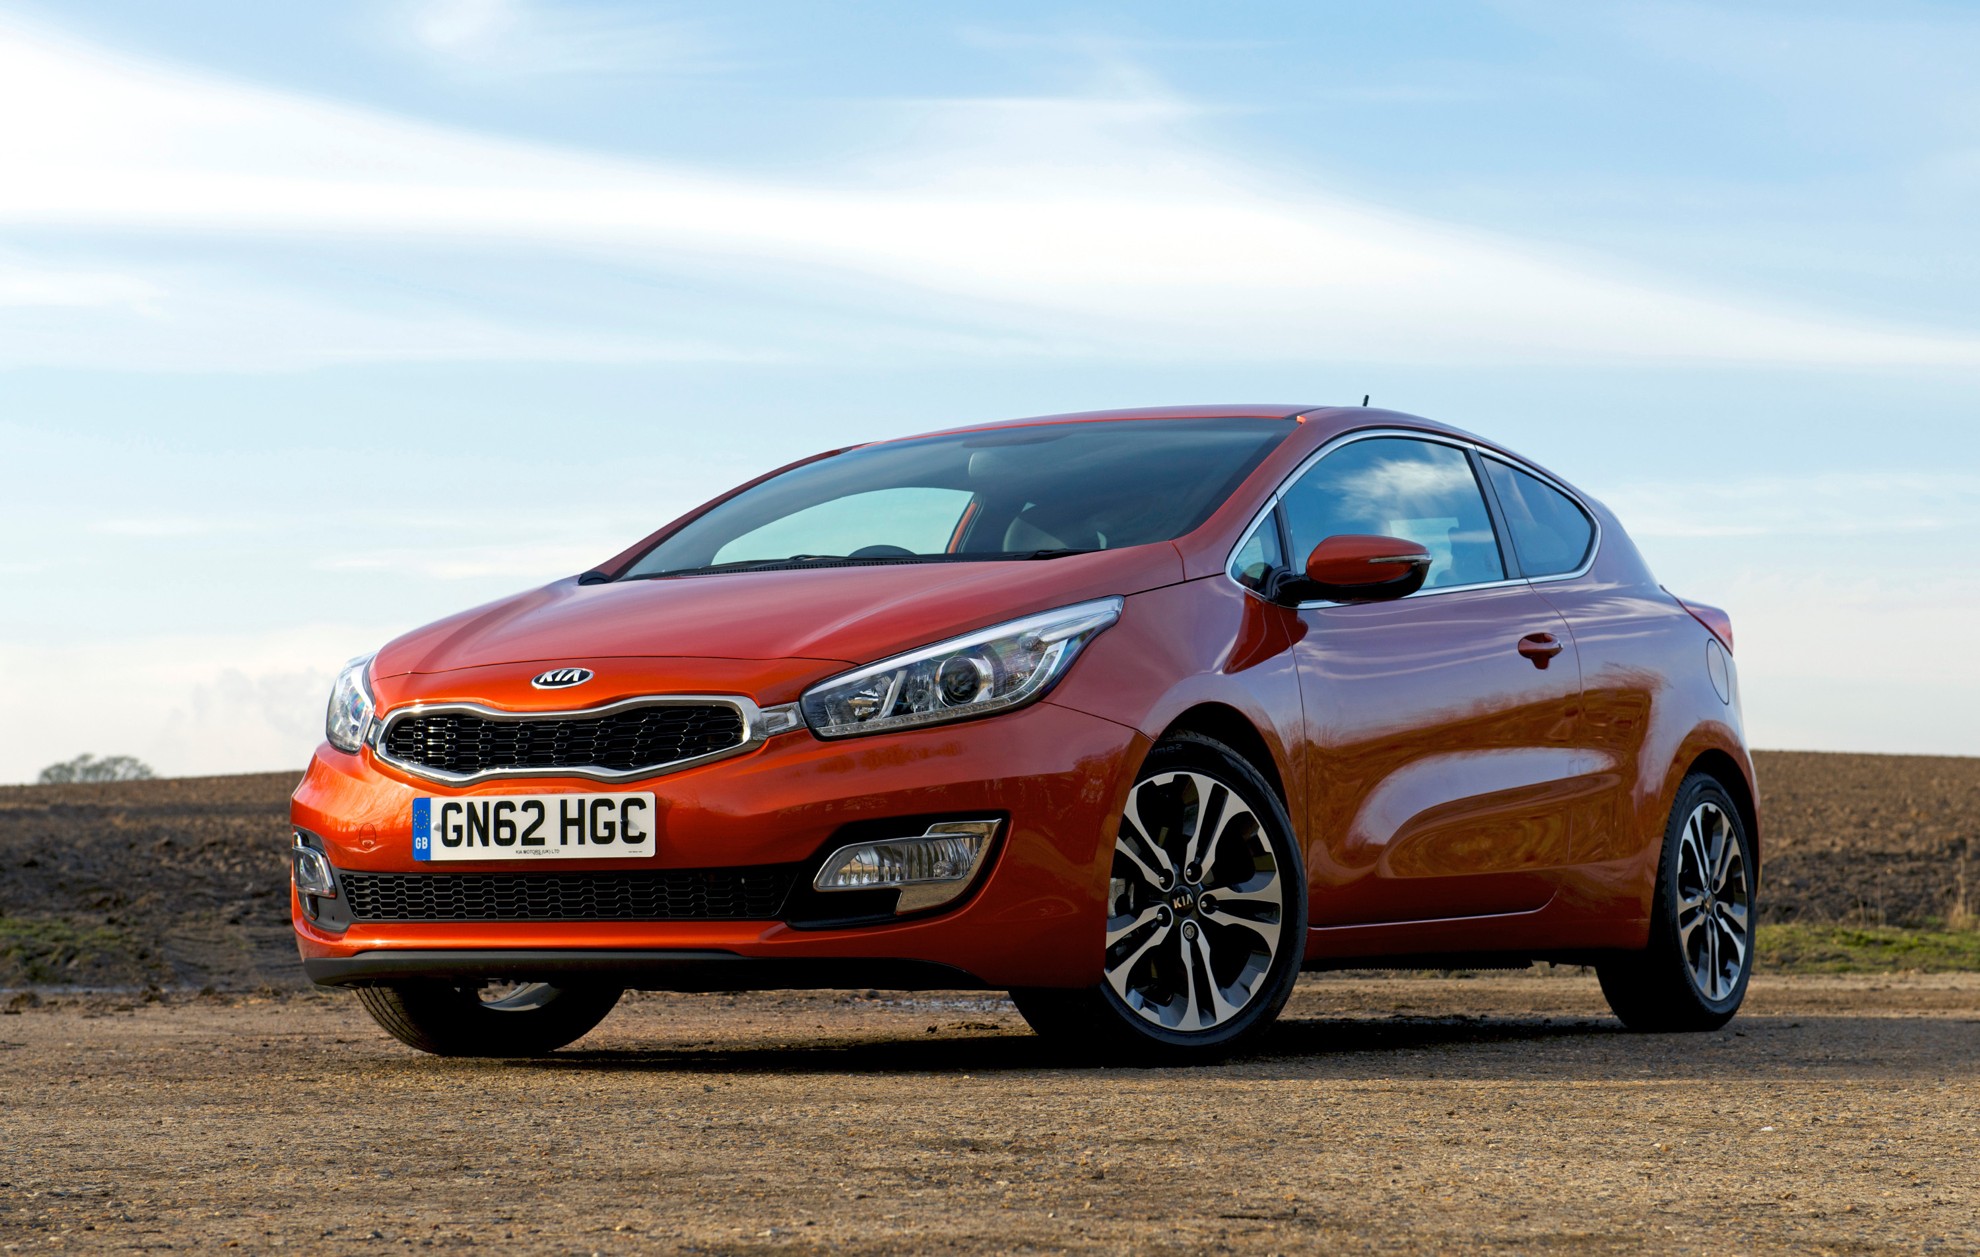 KIA REINTRODUCES 'GT-LINE S' CEED AND PROCEED; BRINGS DCT BACK